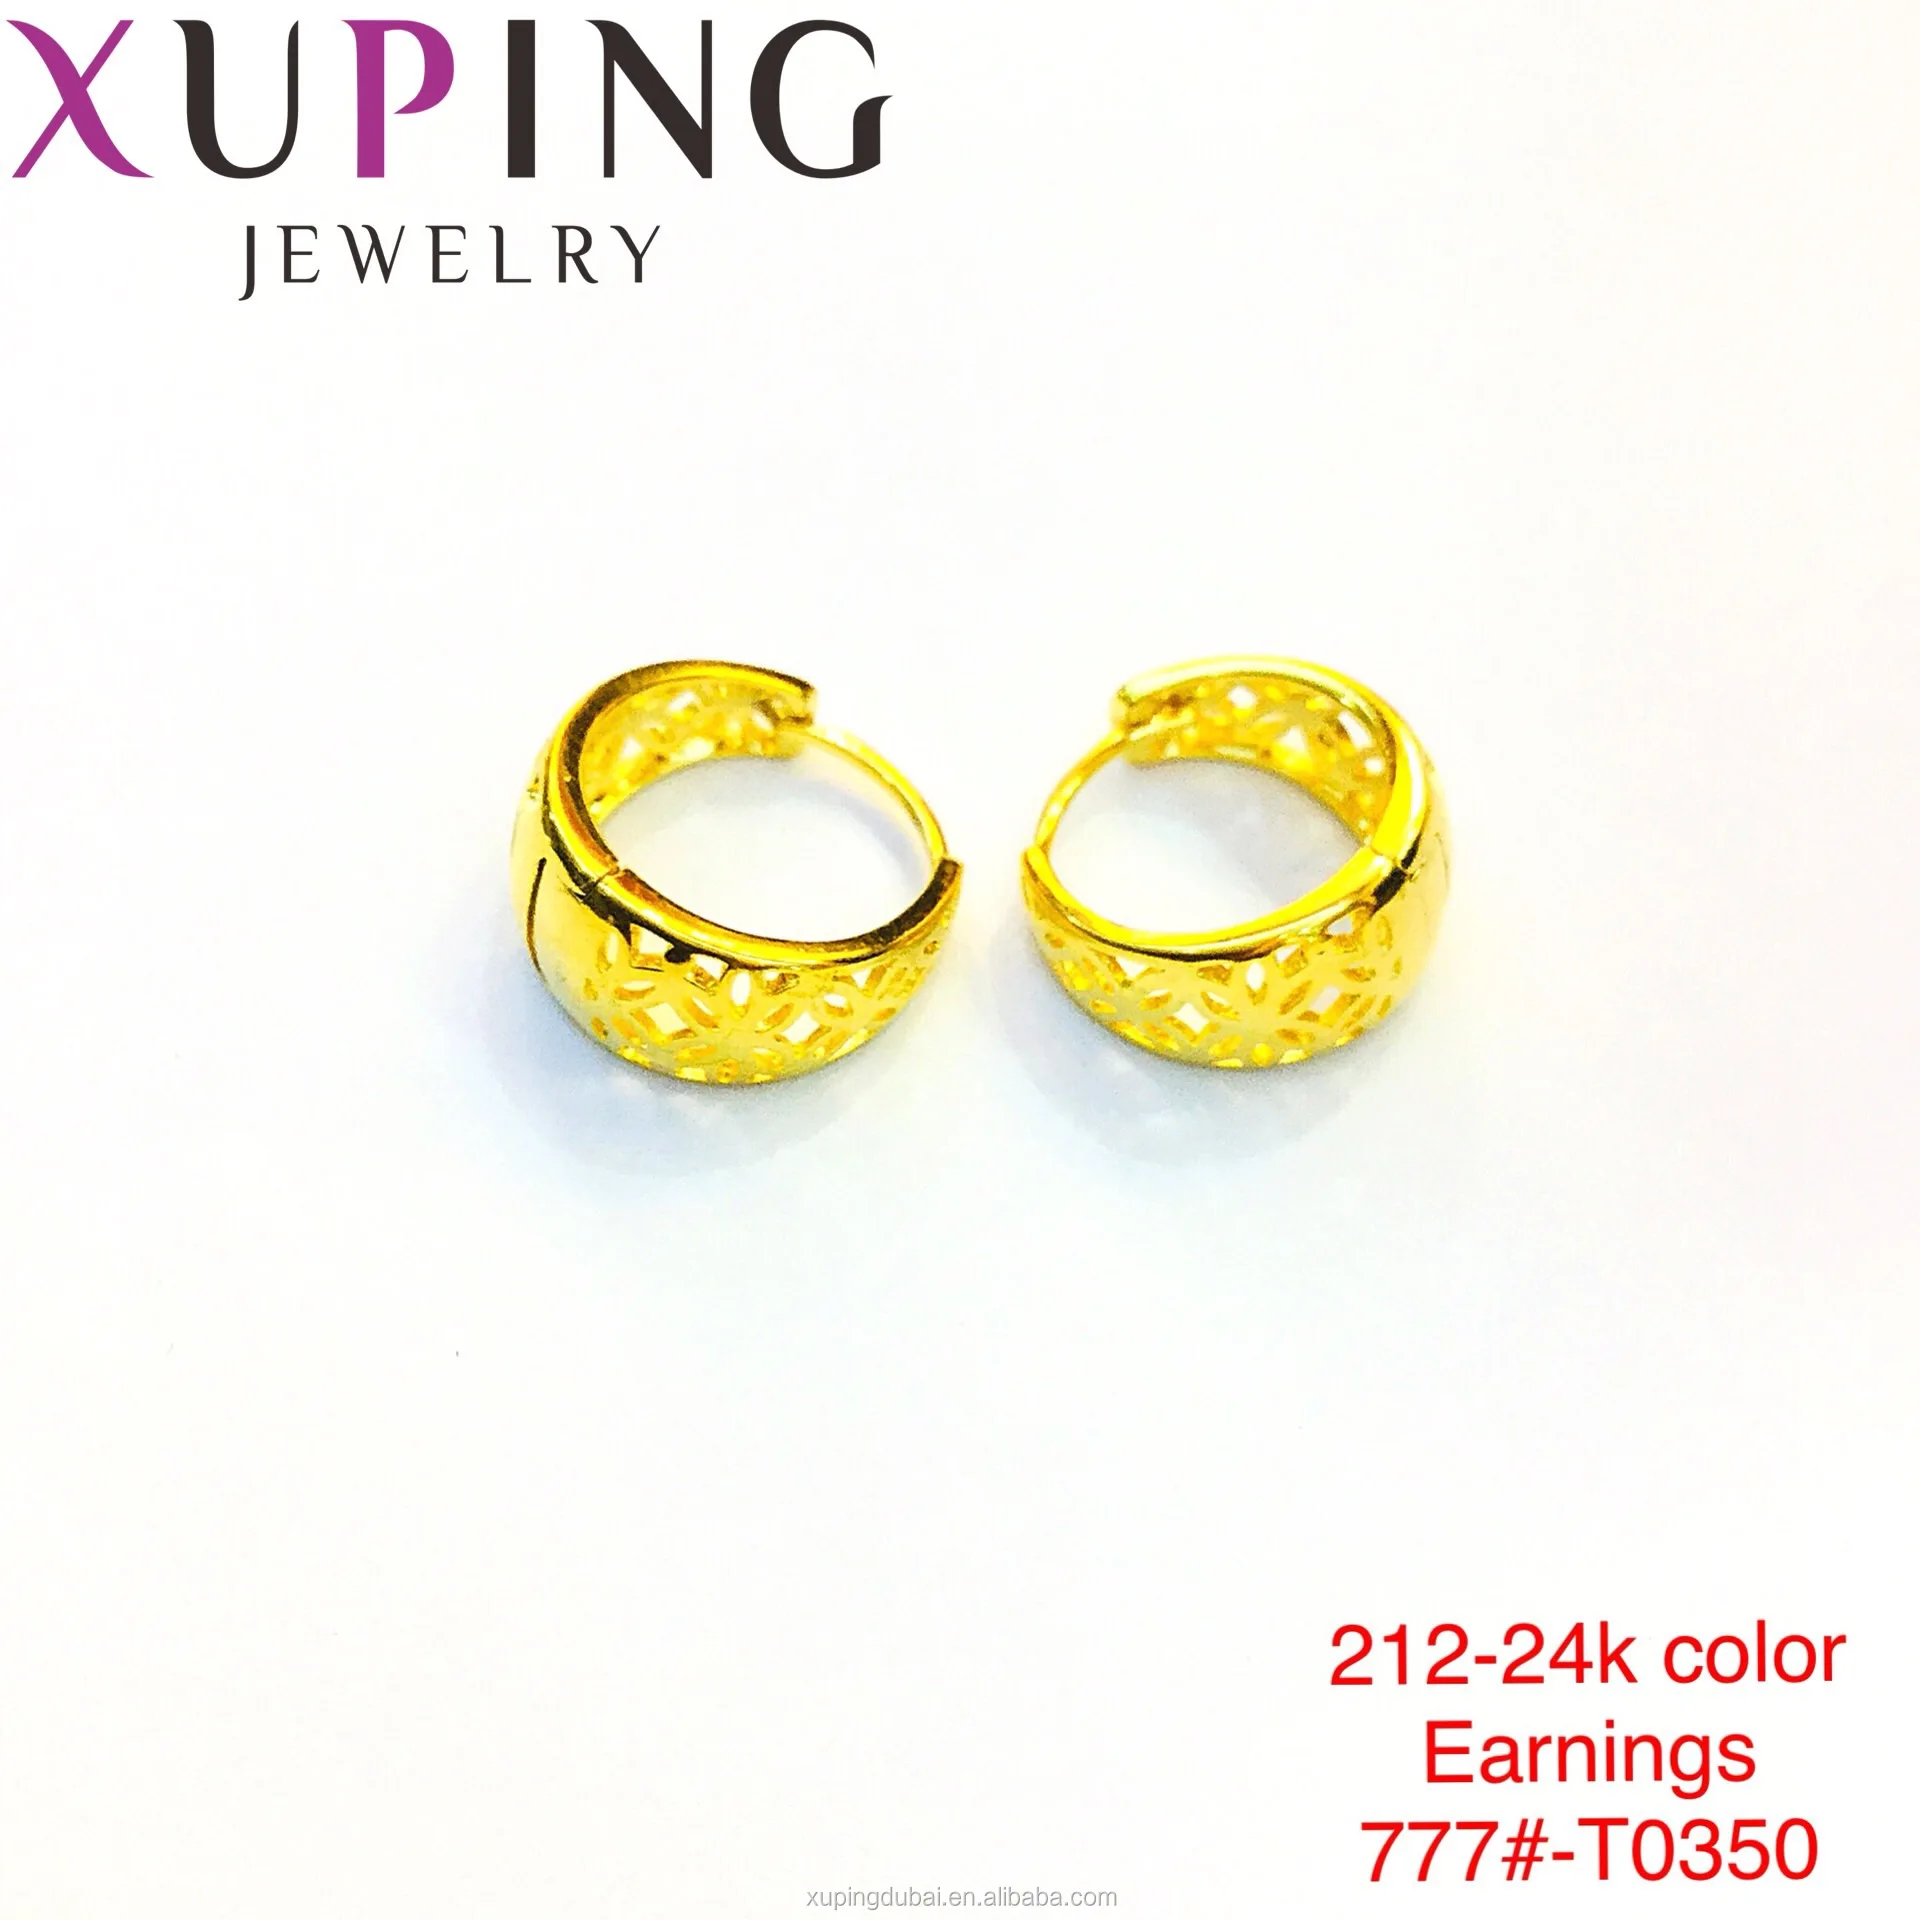 Xuping Jewelry Charming Luxury Zircon Earrings With 24 K Gold Plated ...